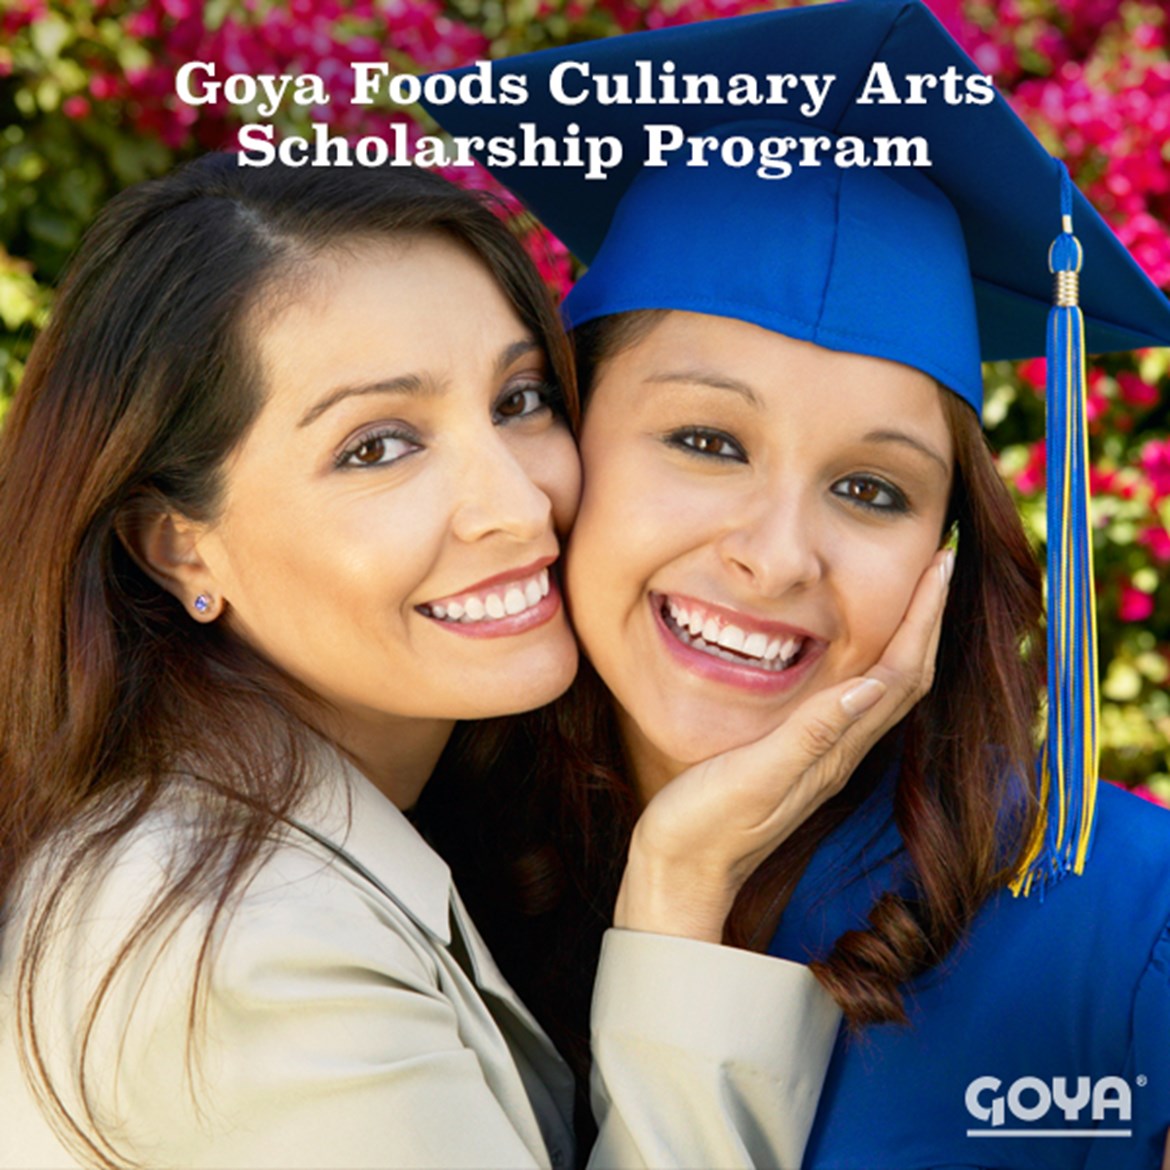 Press Release: 2019: GOYA FOODS OFFERS $20,000 CULINARY ARTS & FOOD SCIENCE SCHOLARSHIPS TO STUDENTS NATIONWIDE